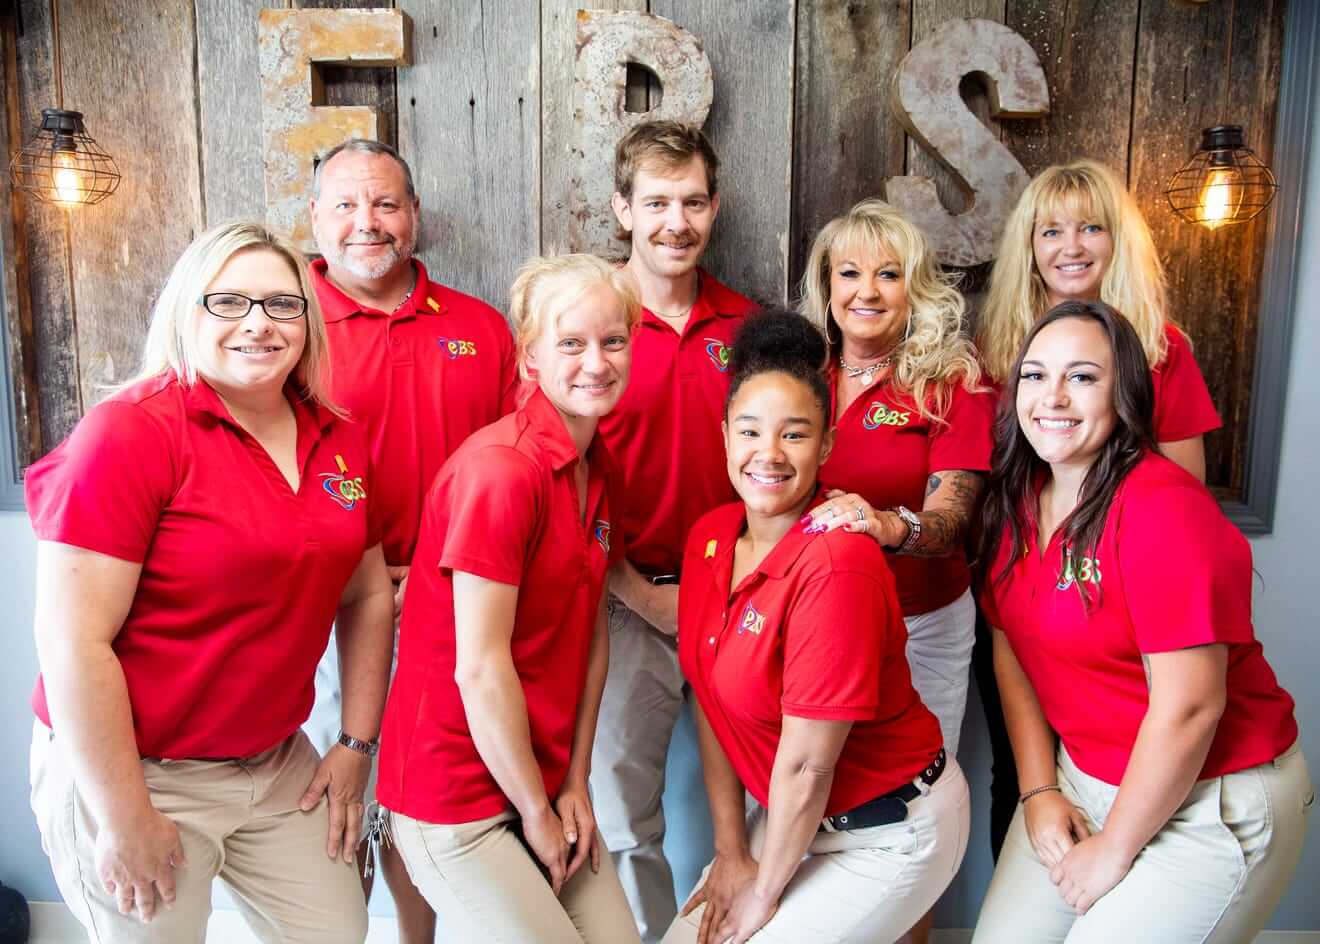 Executive Building Solutions employees in red company polos posing for group photo